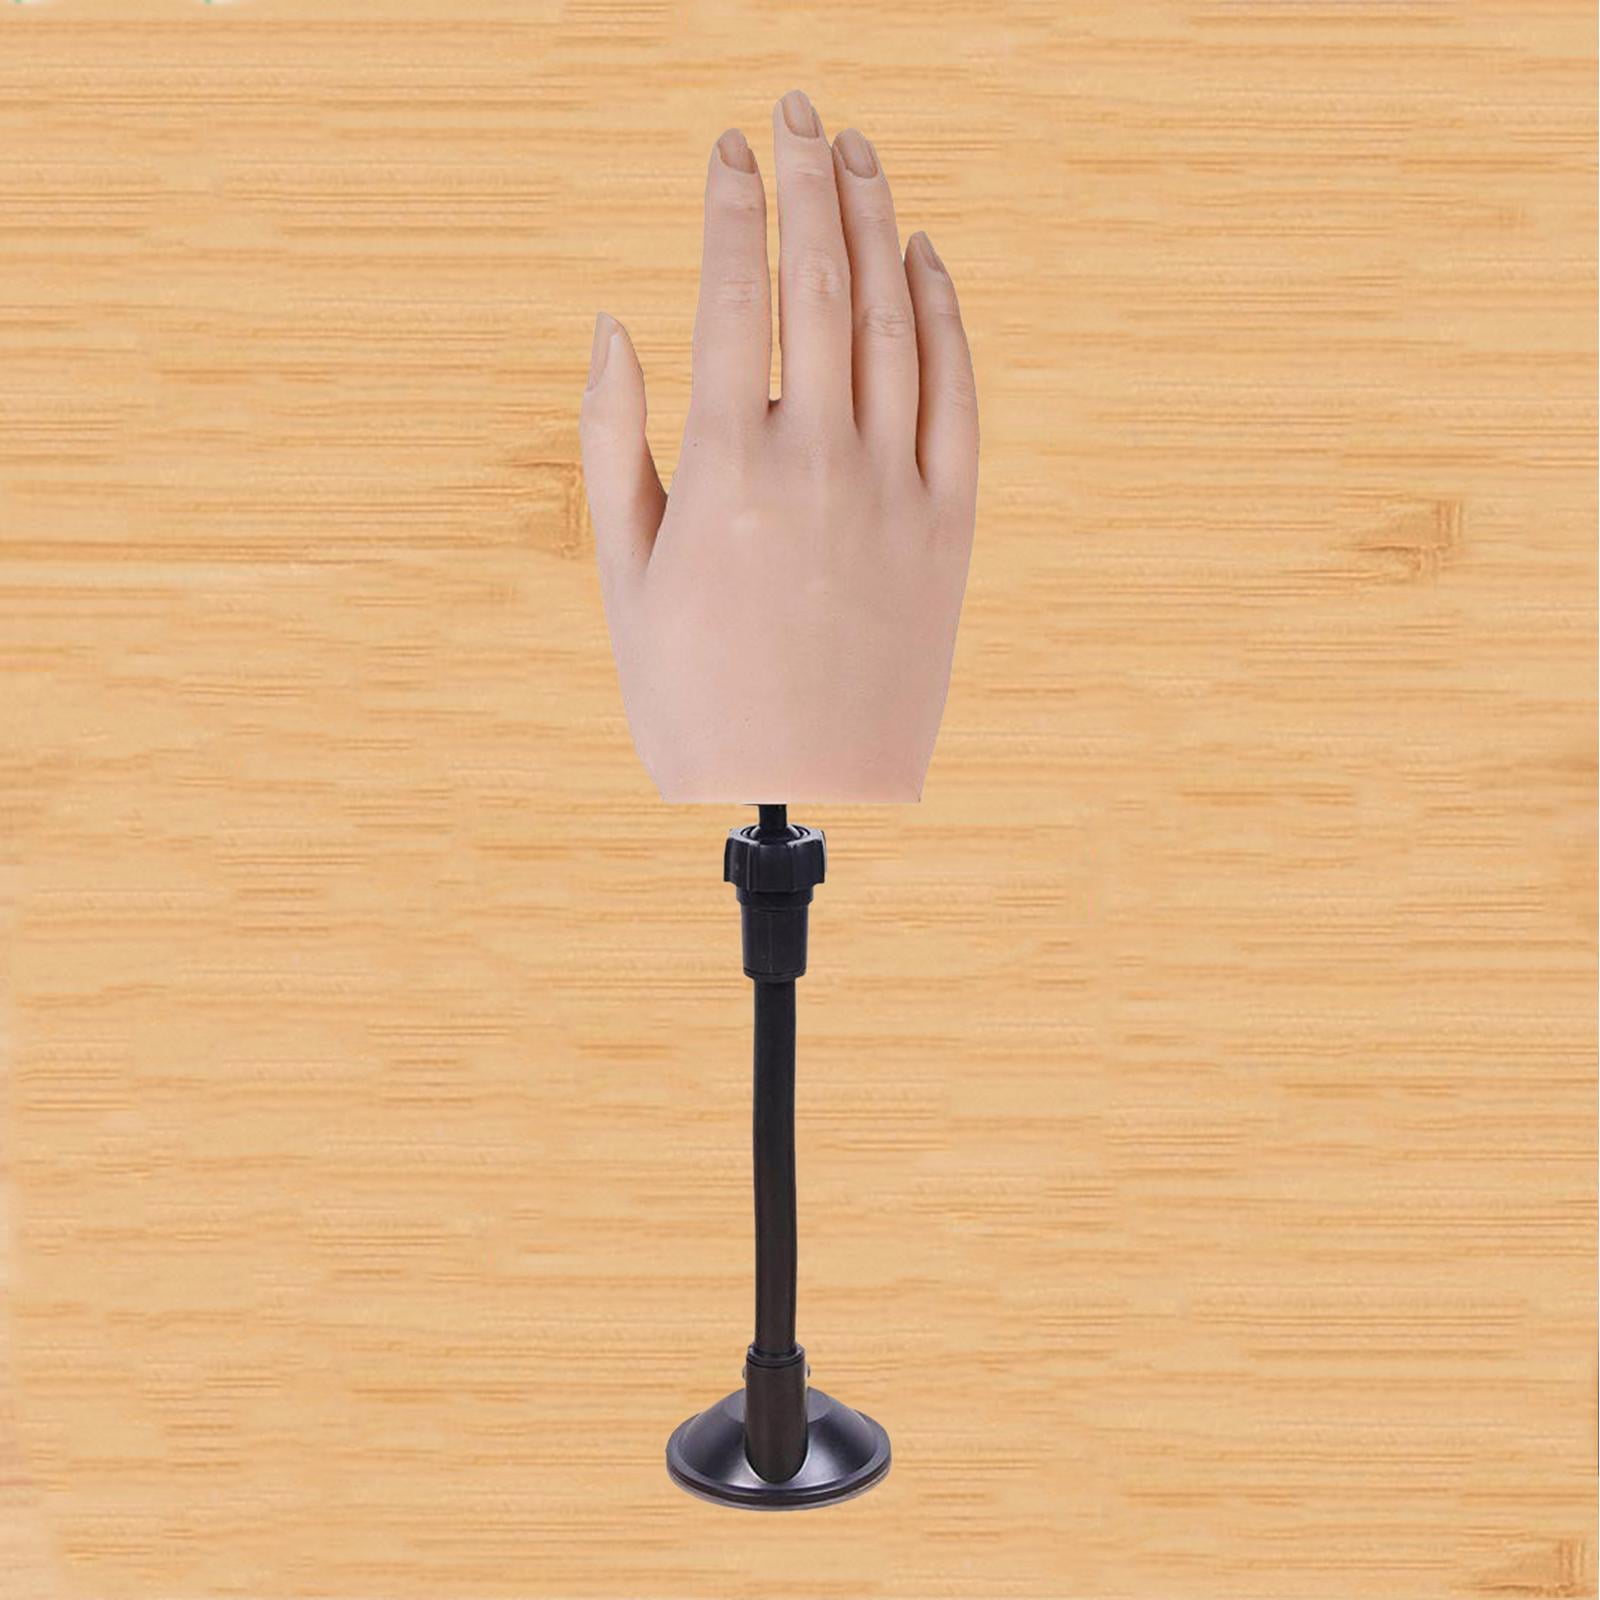 Silic Practice Hand with Stand Holder for Acrylic Nails, Fingers can be  Bent, 